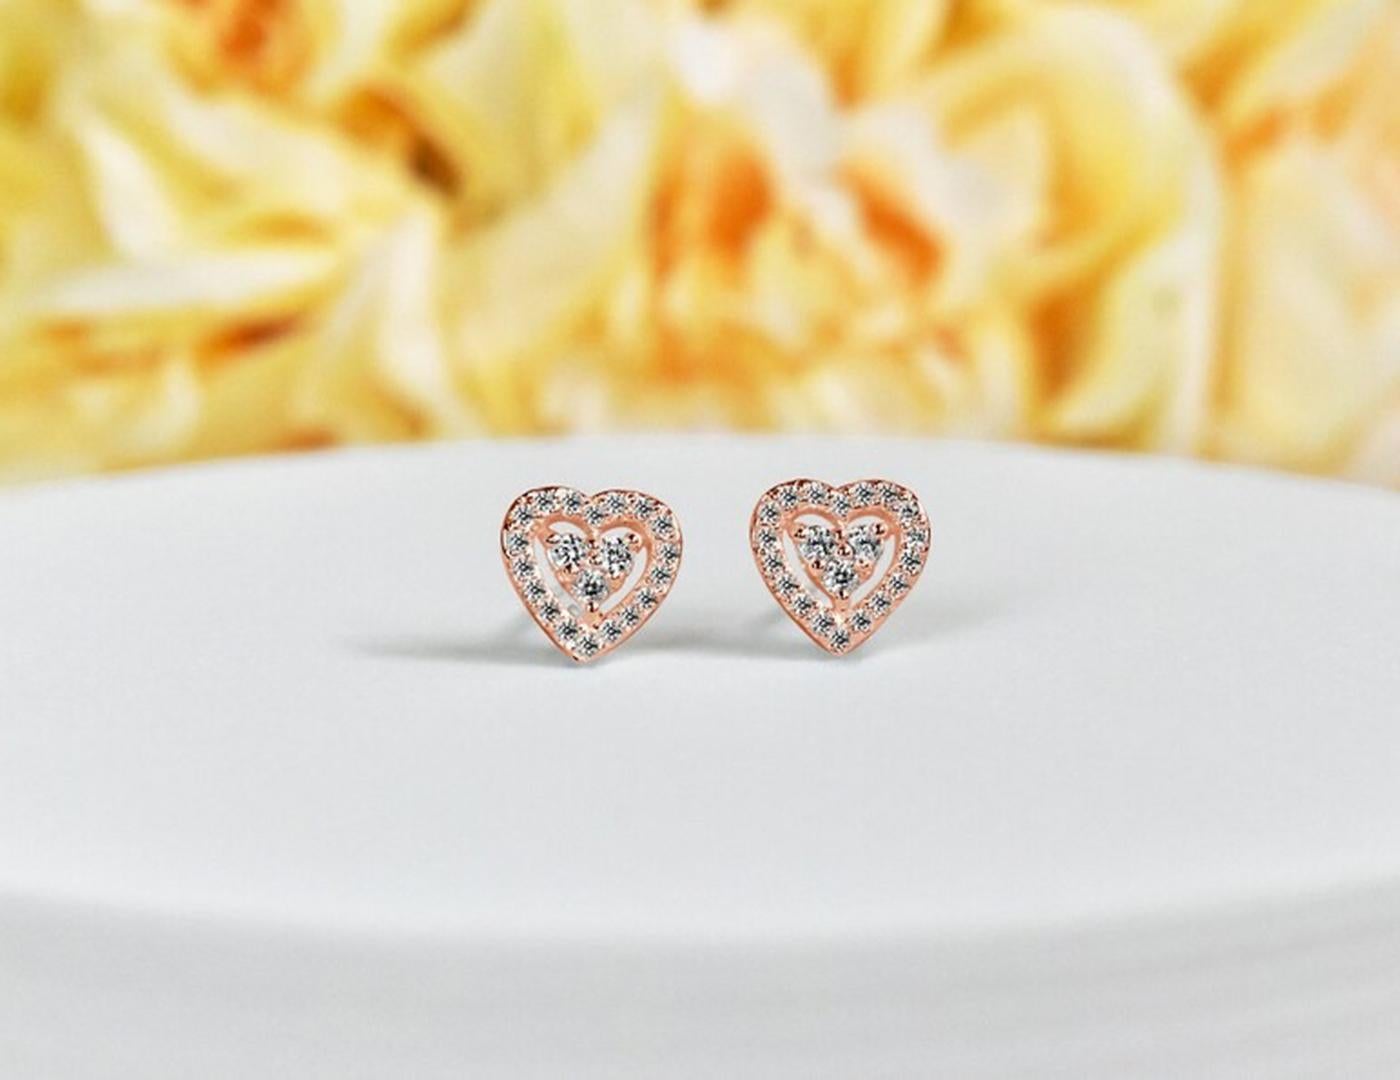 Diamond Heart Stud Earrings in 18k Rose Gold, Yellow Gold, White Gold.

These Dainty Stud Earrings are made of 18k solid gold featuring shiny brilliant round cut natural diamonds set by master setter in our studio. Simple but unique, elegant and